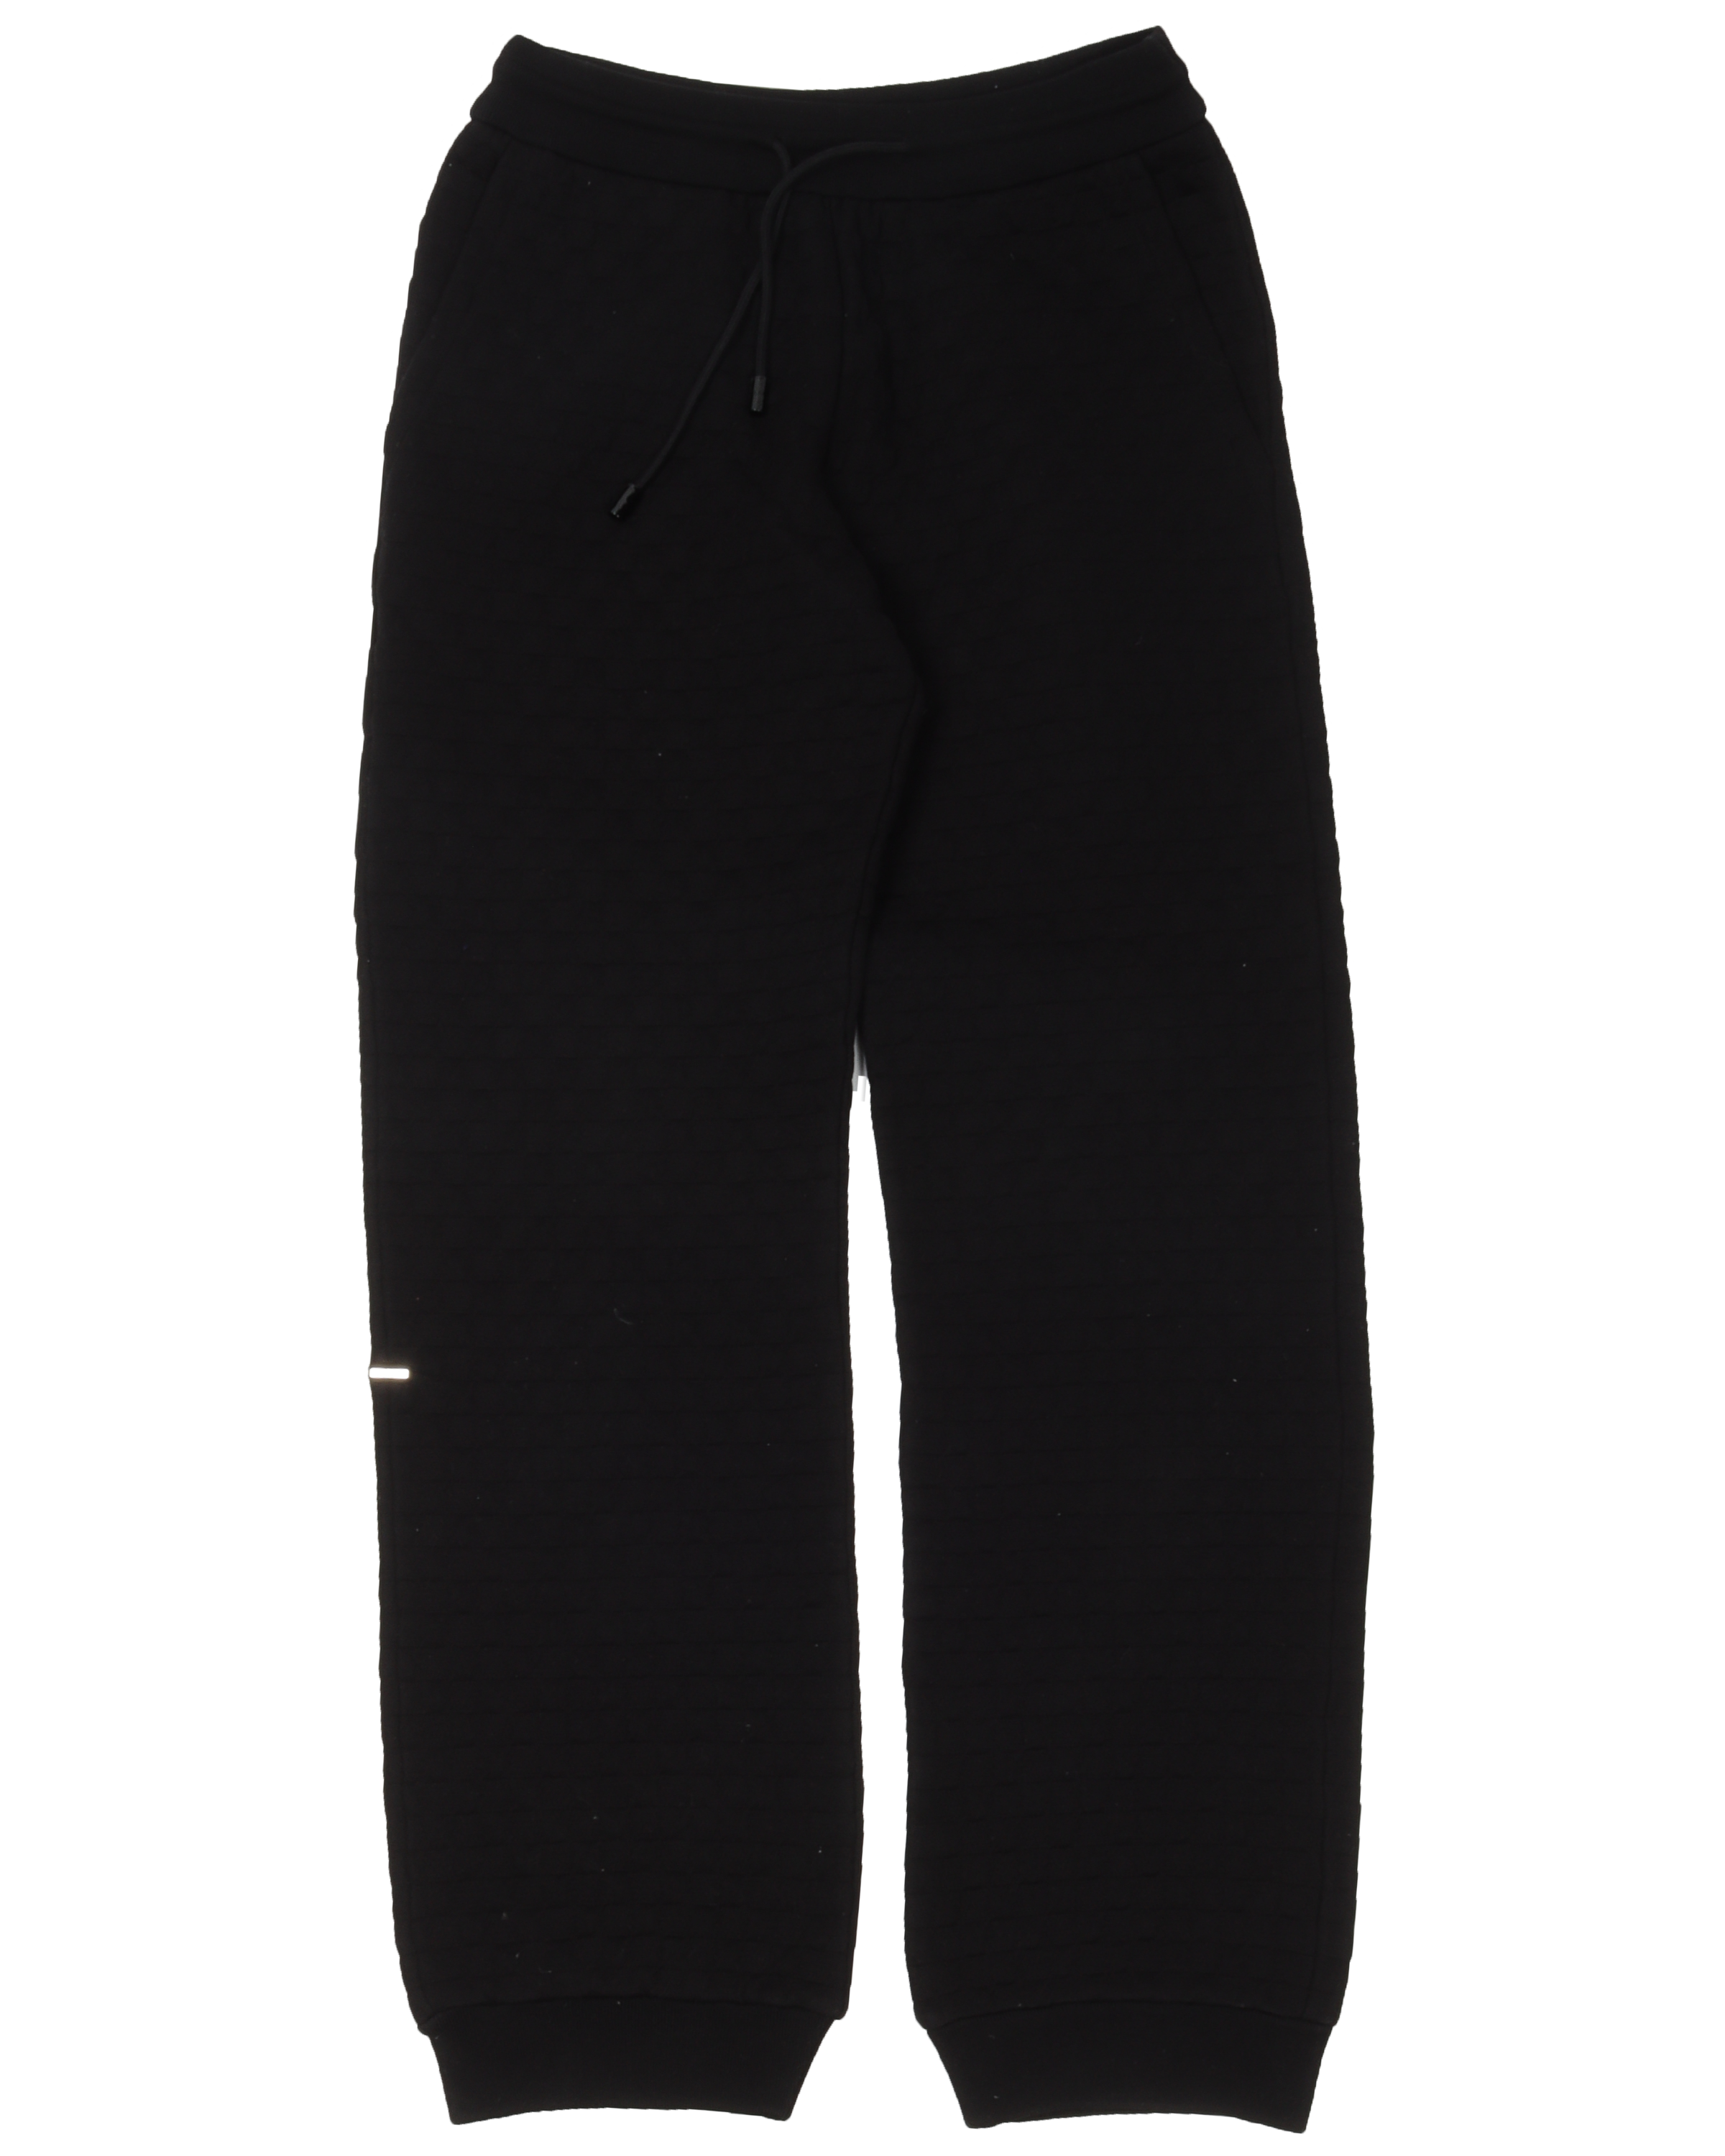 Products By Louis Vuitton: Lvse Damier Sweat Pants